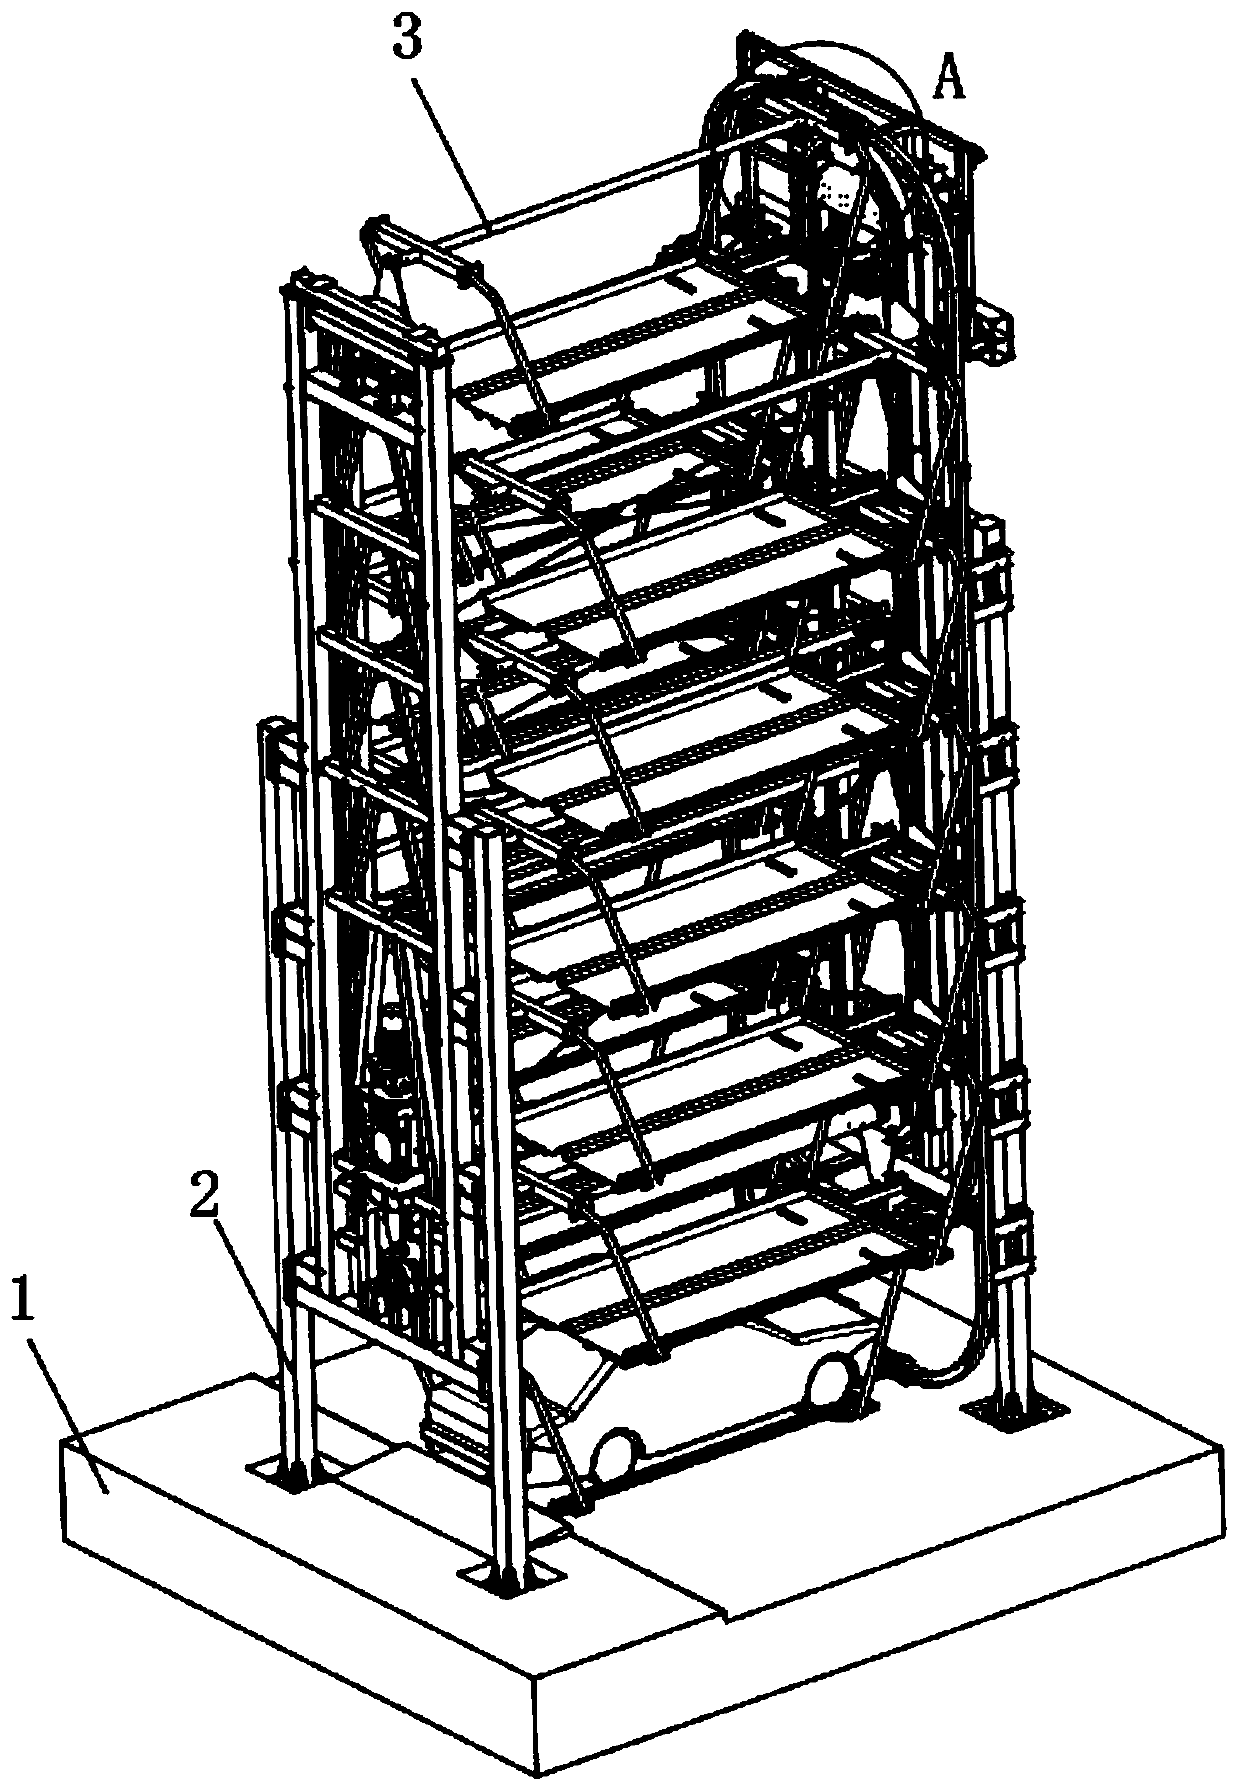 Three-dimensional mechanical parking garage capable of achieving rapid vehicle garaging and separated transmission